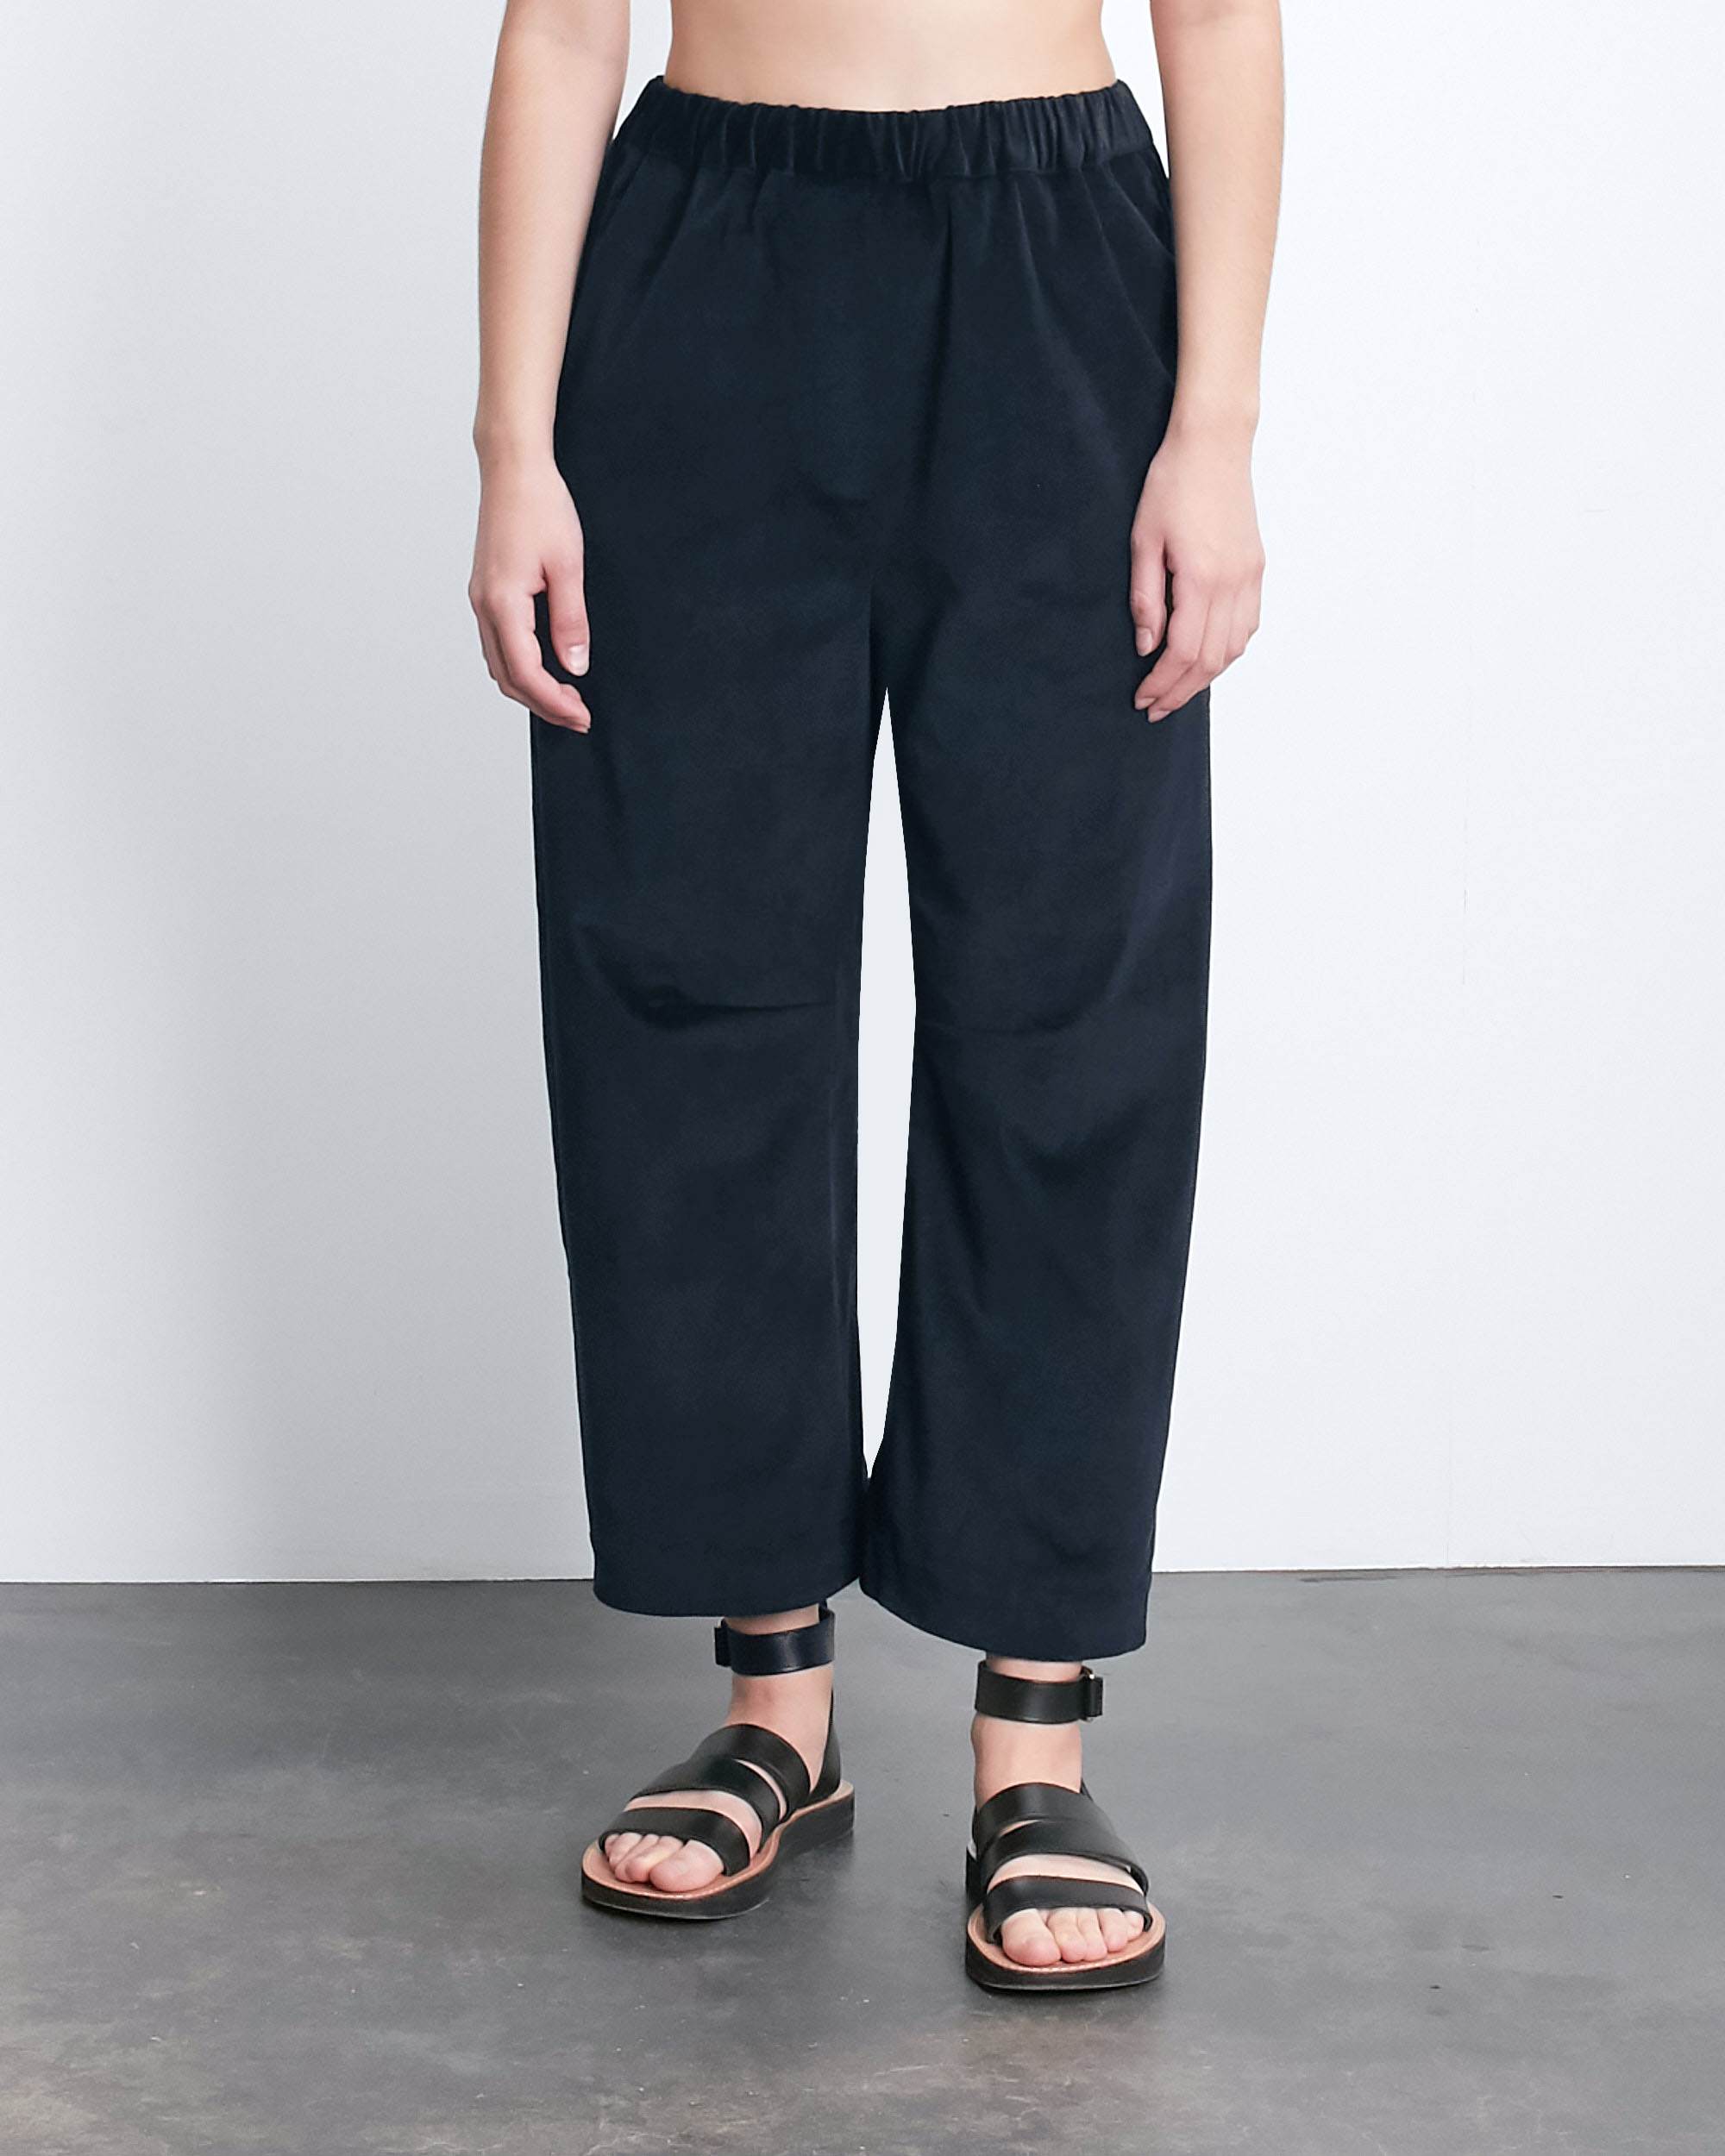 Roucha + Panch Corduroy Curved Inseam Pant